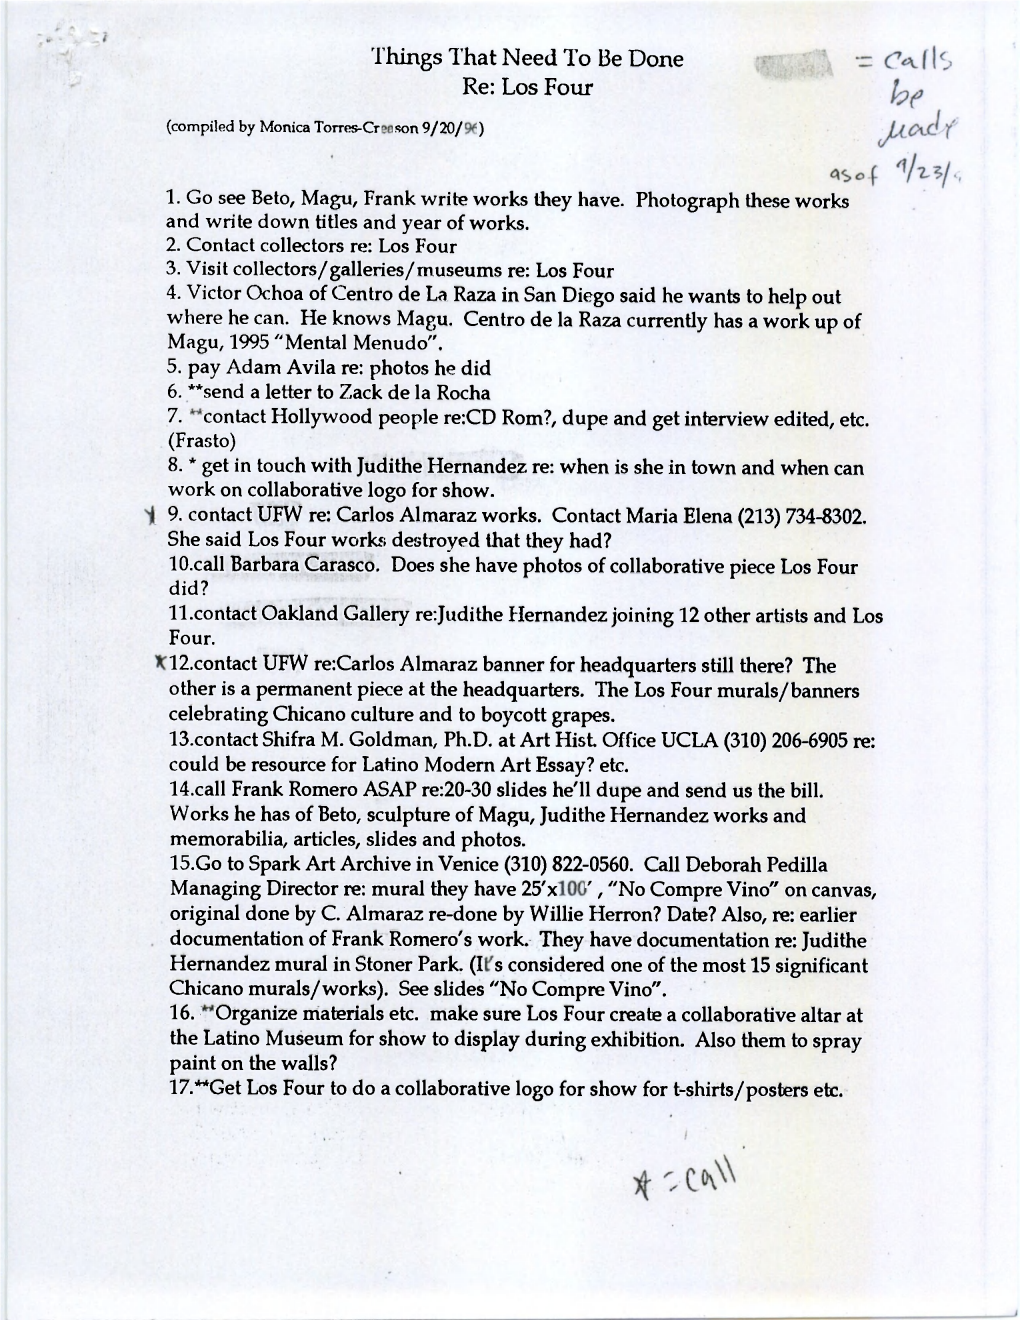 Things That Need to Be Done Re: Los Four (Compiled by Monica Torres-Creason 9/20/96)